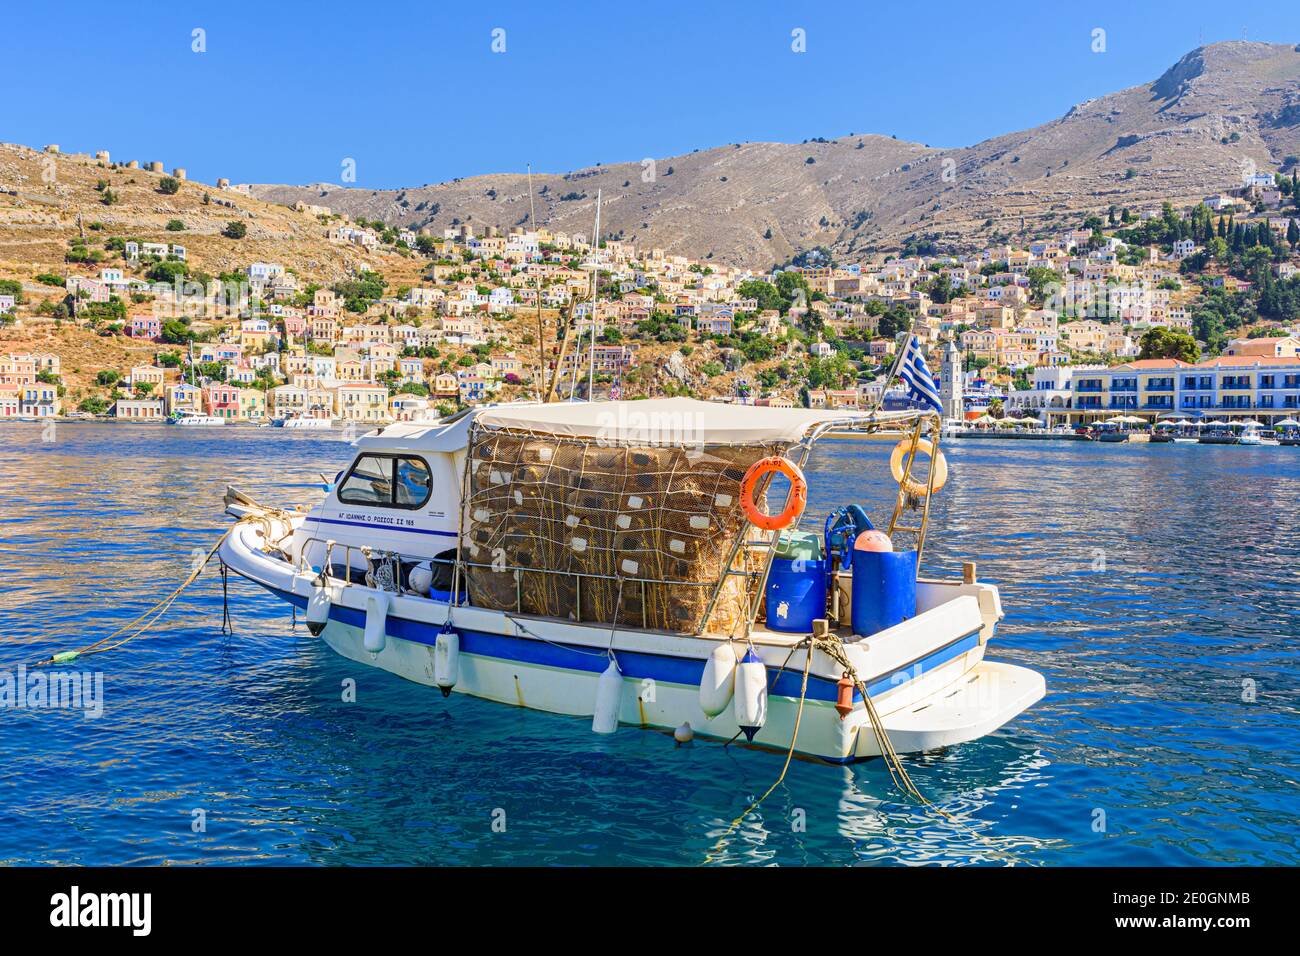 Fishing boat in Yialos harbour, Symi Island, Dodecanese, Greece Stock Photo